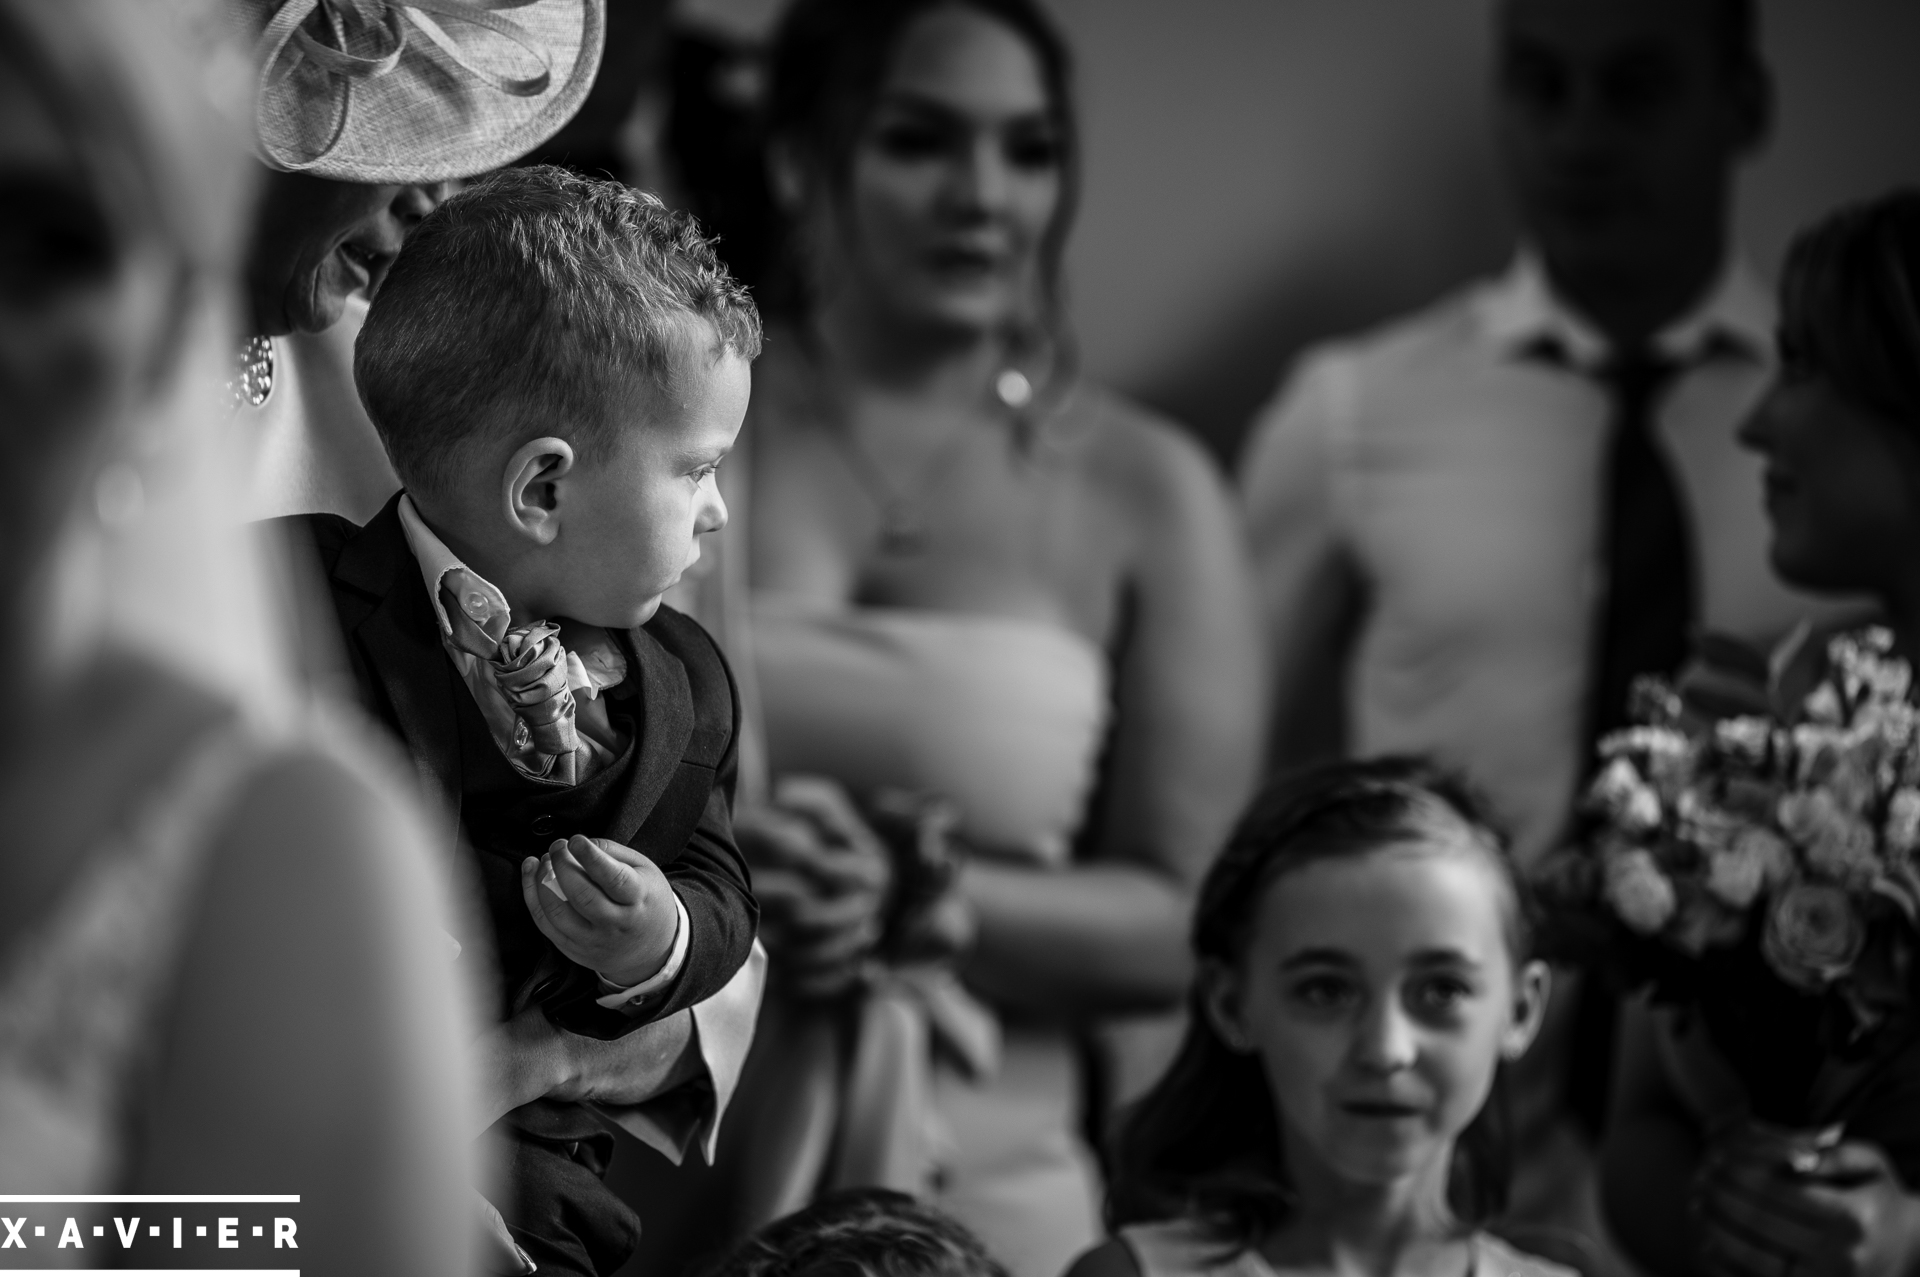 pageboy is distracted during the ceremony